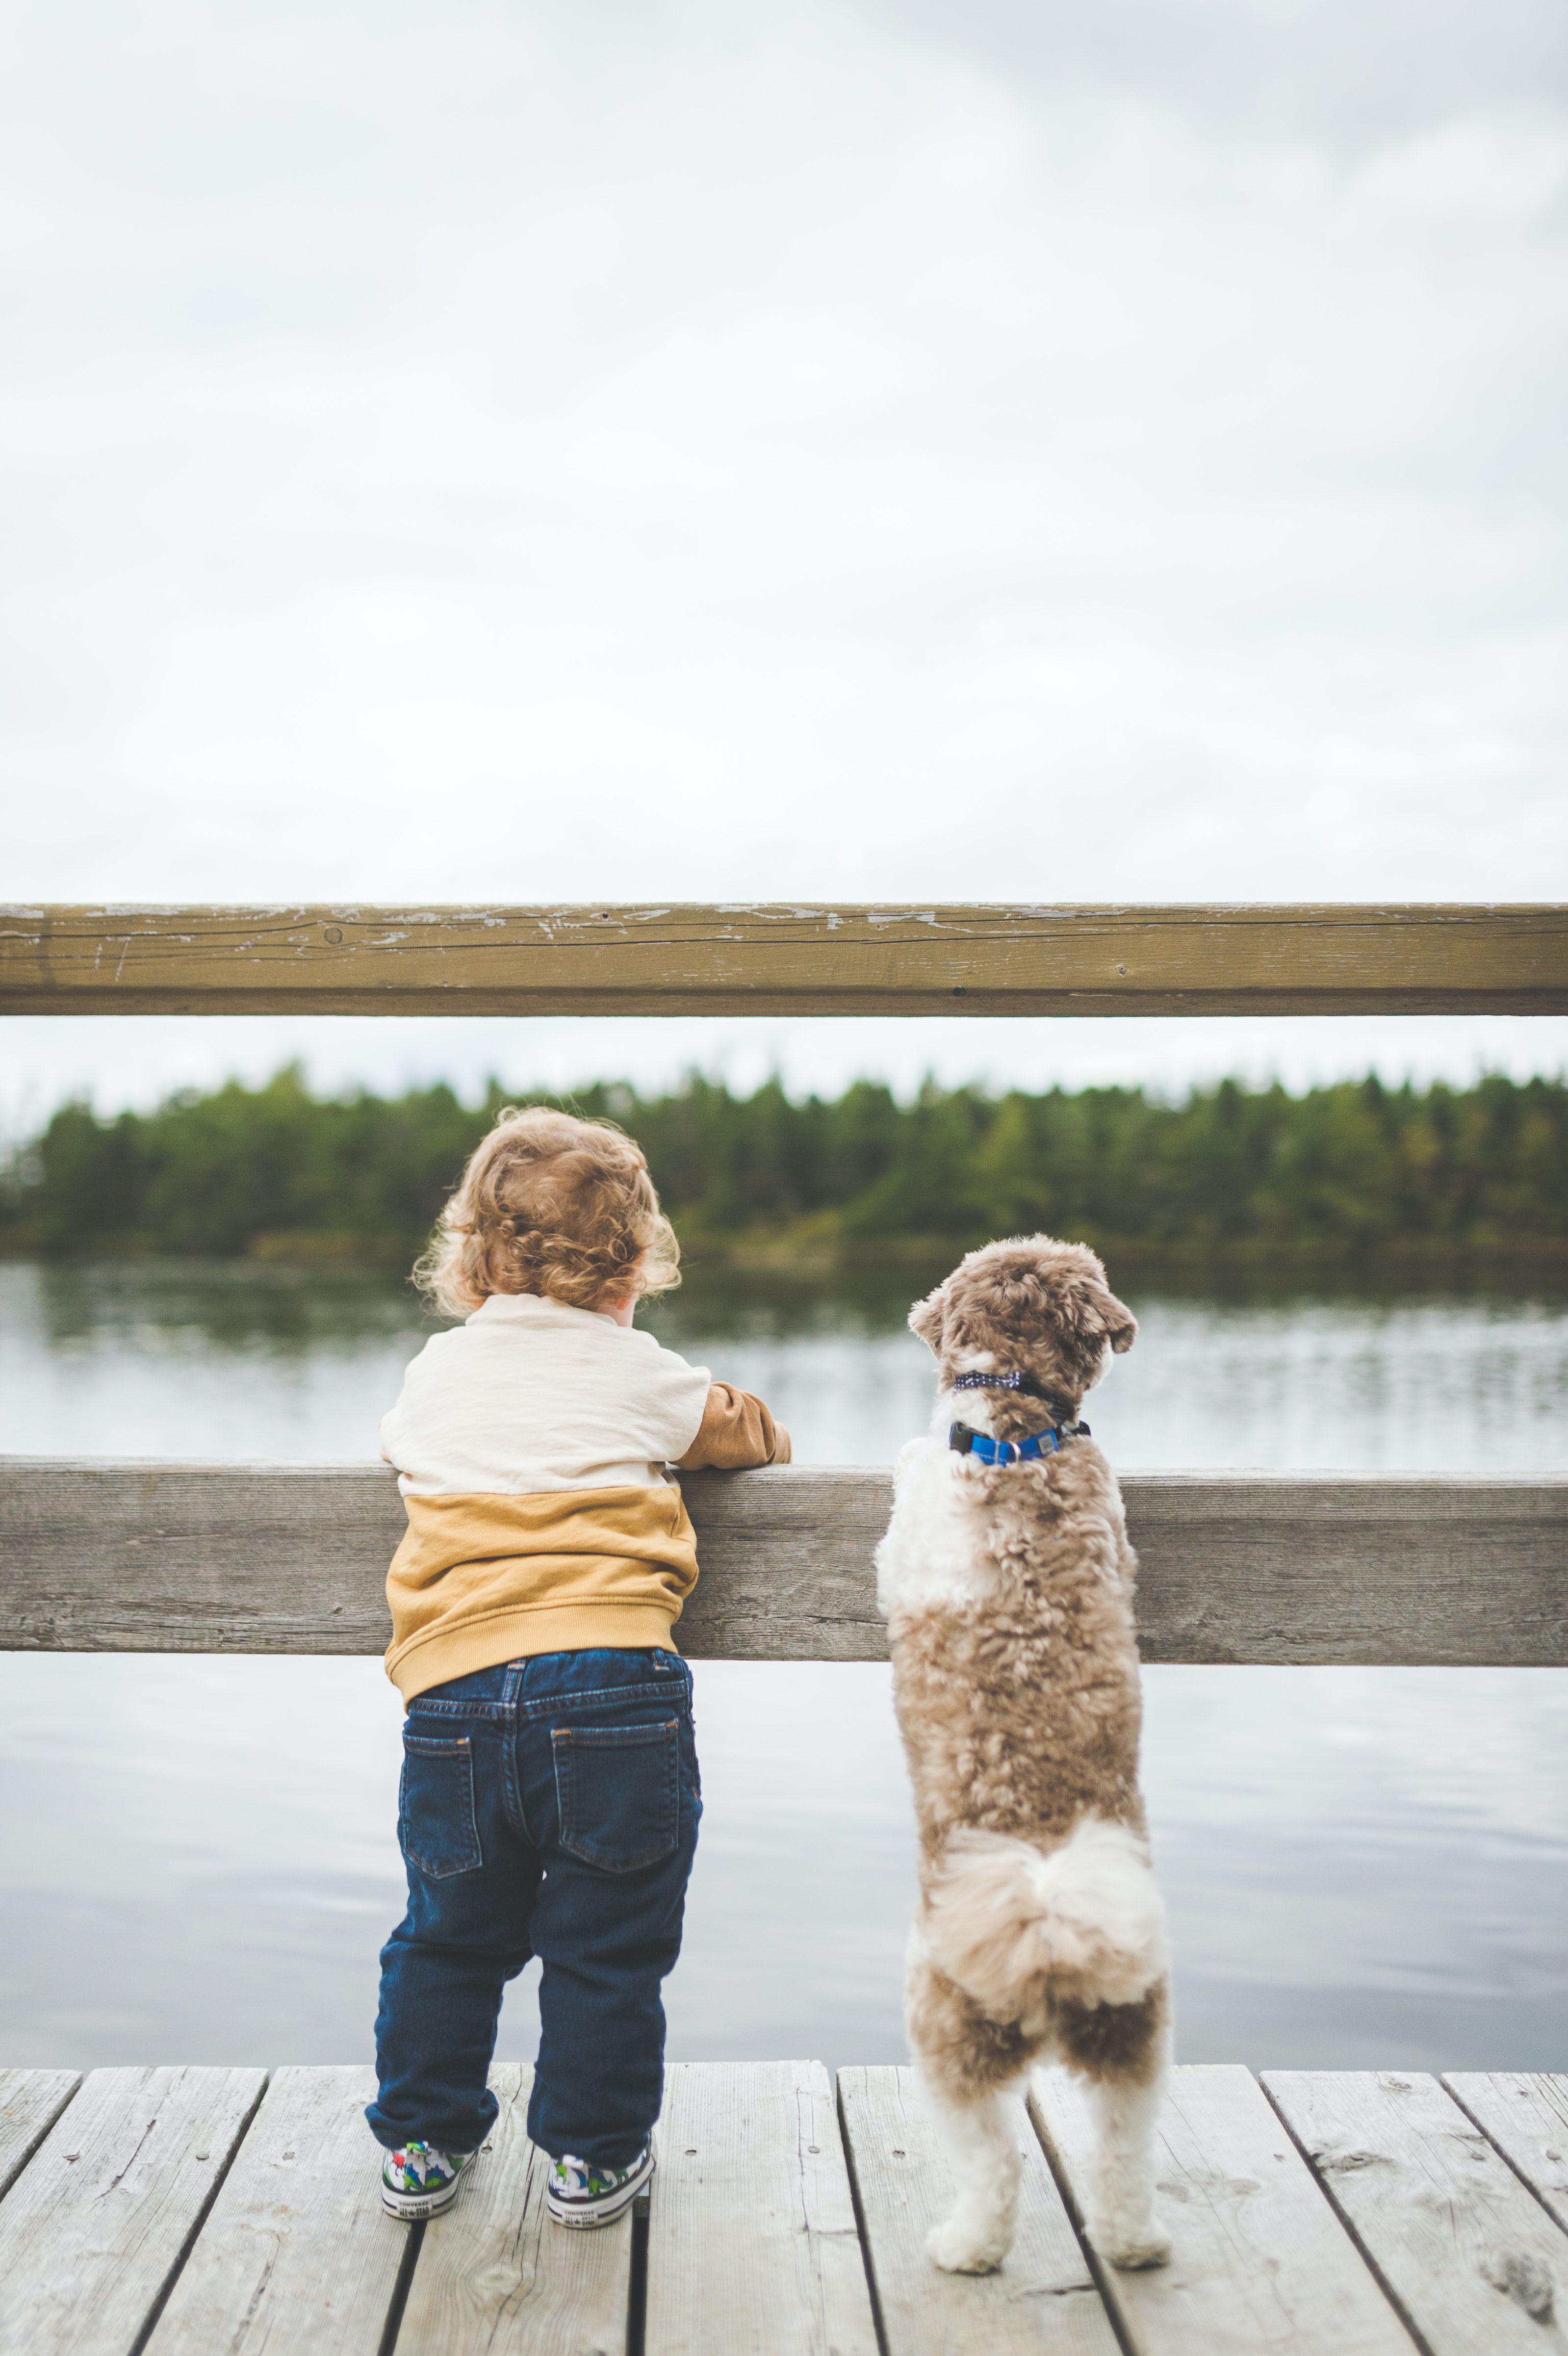 Child with a dog standing at a lake